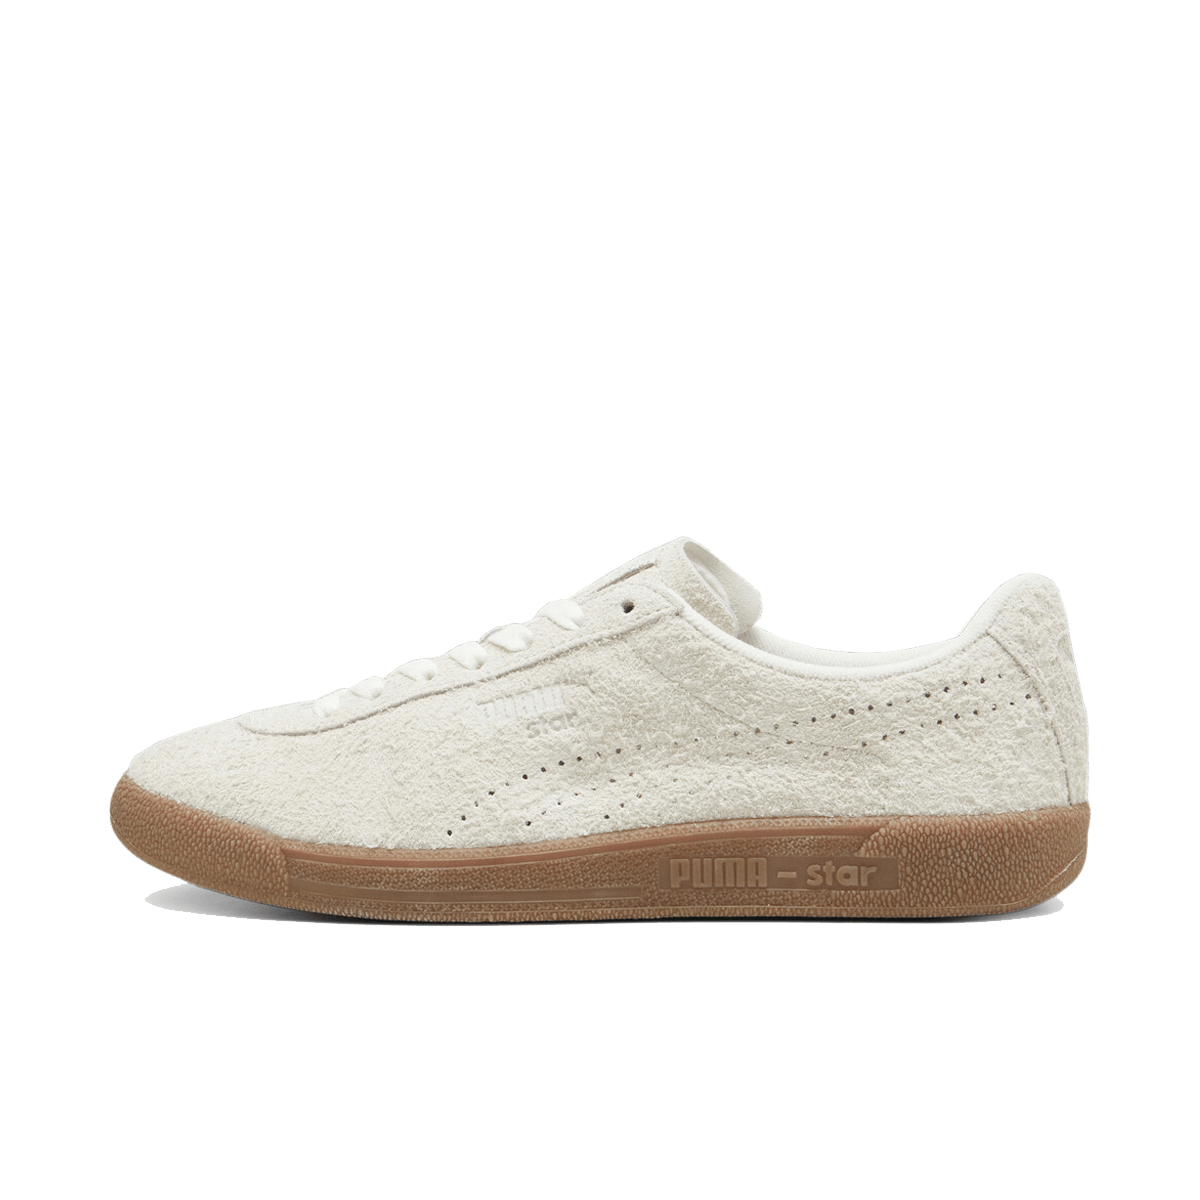 Puma Star SD 'Frosted Ivory' 396465-01